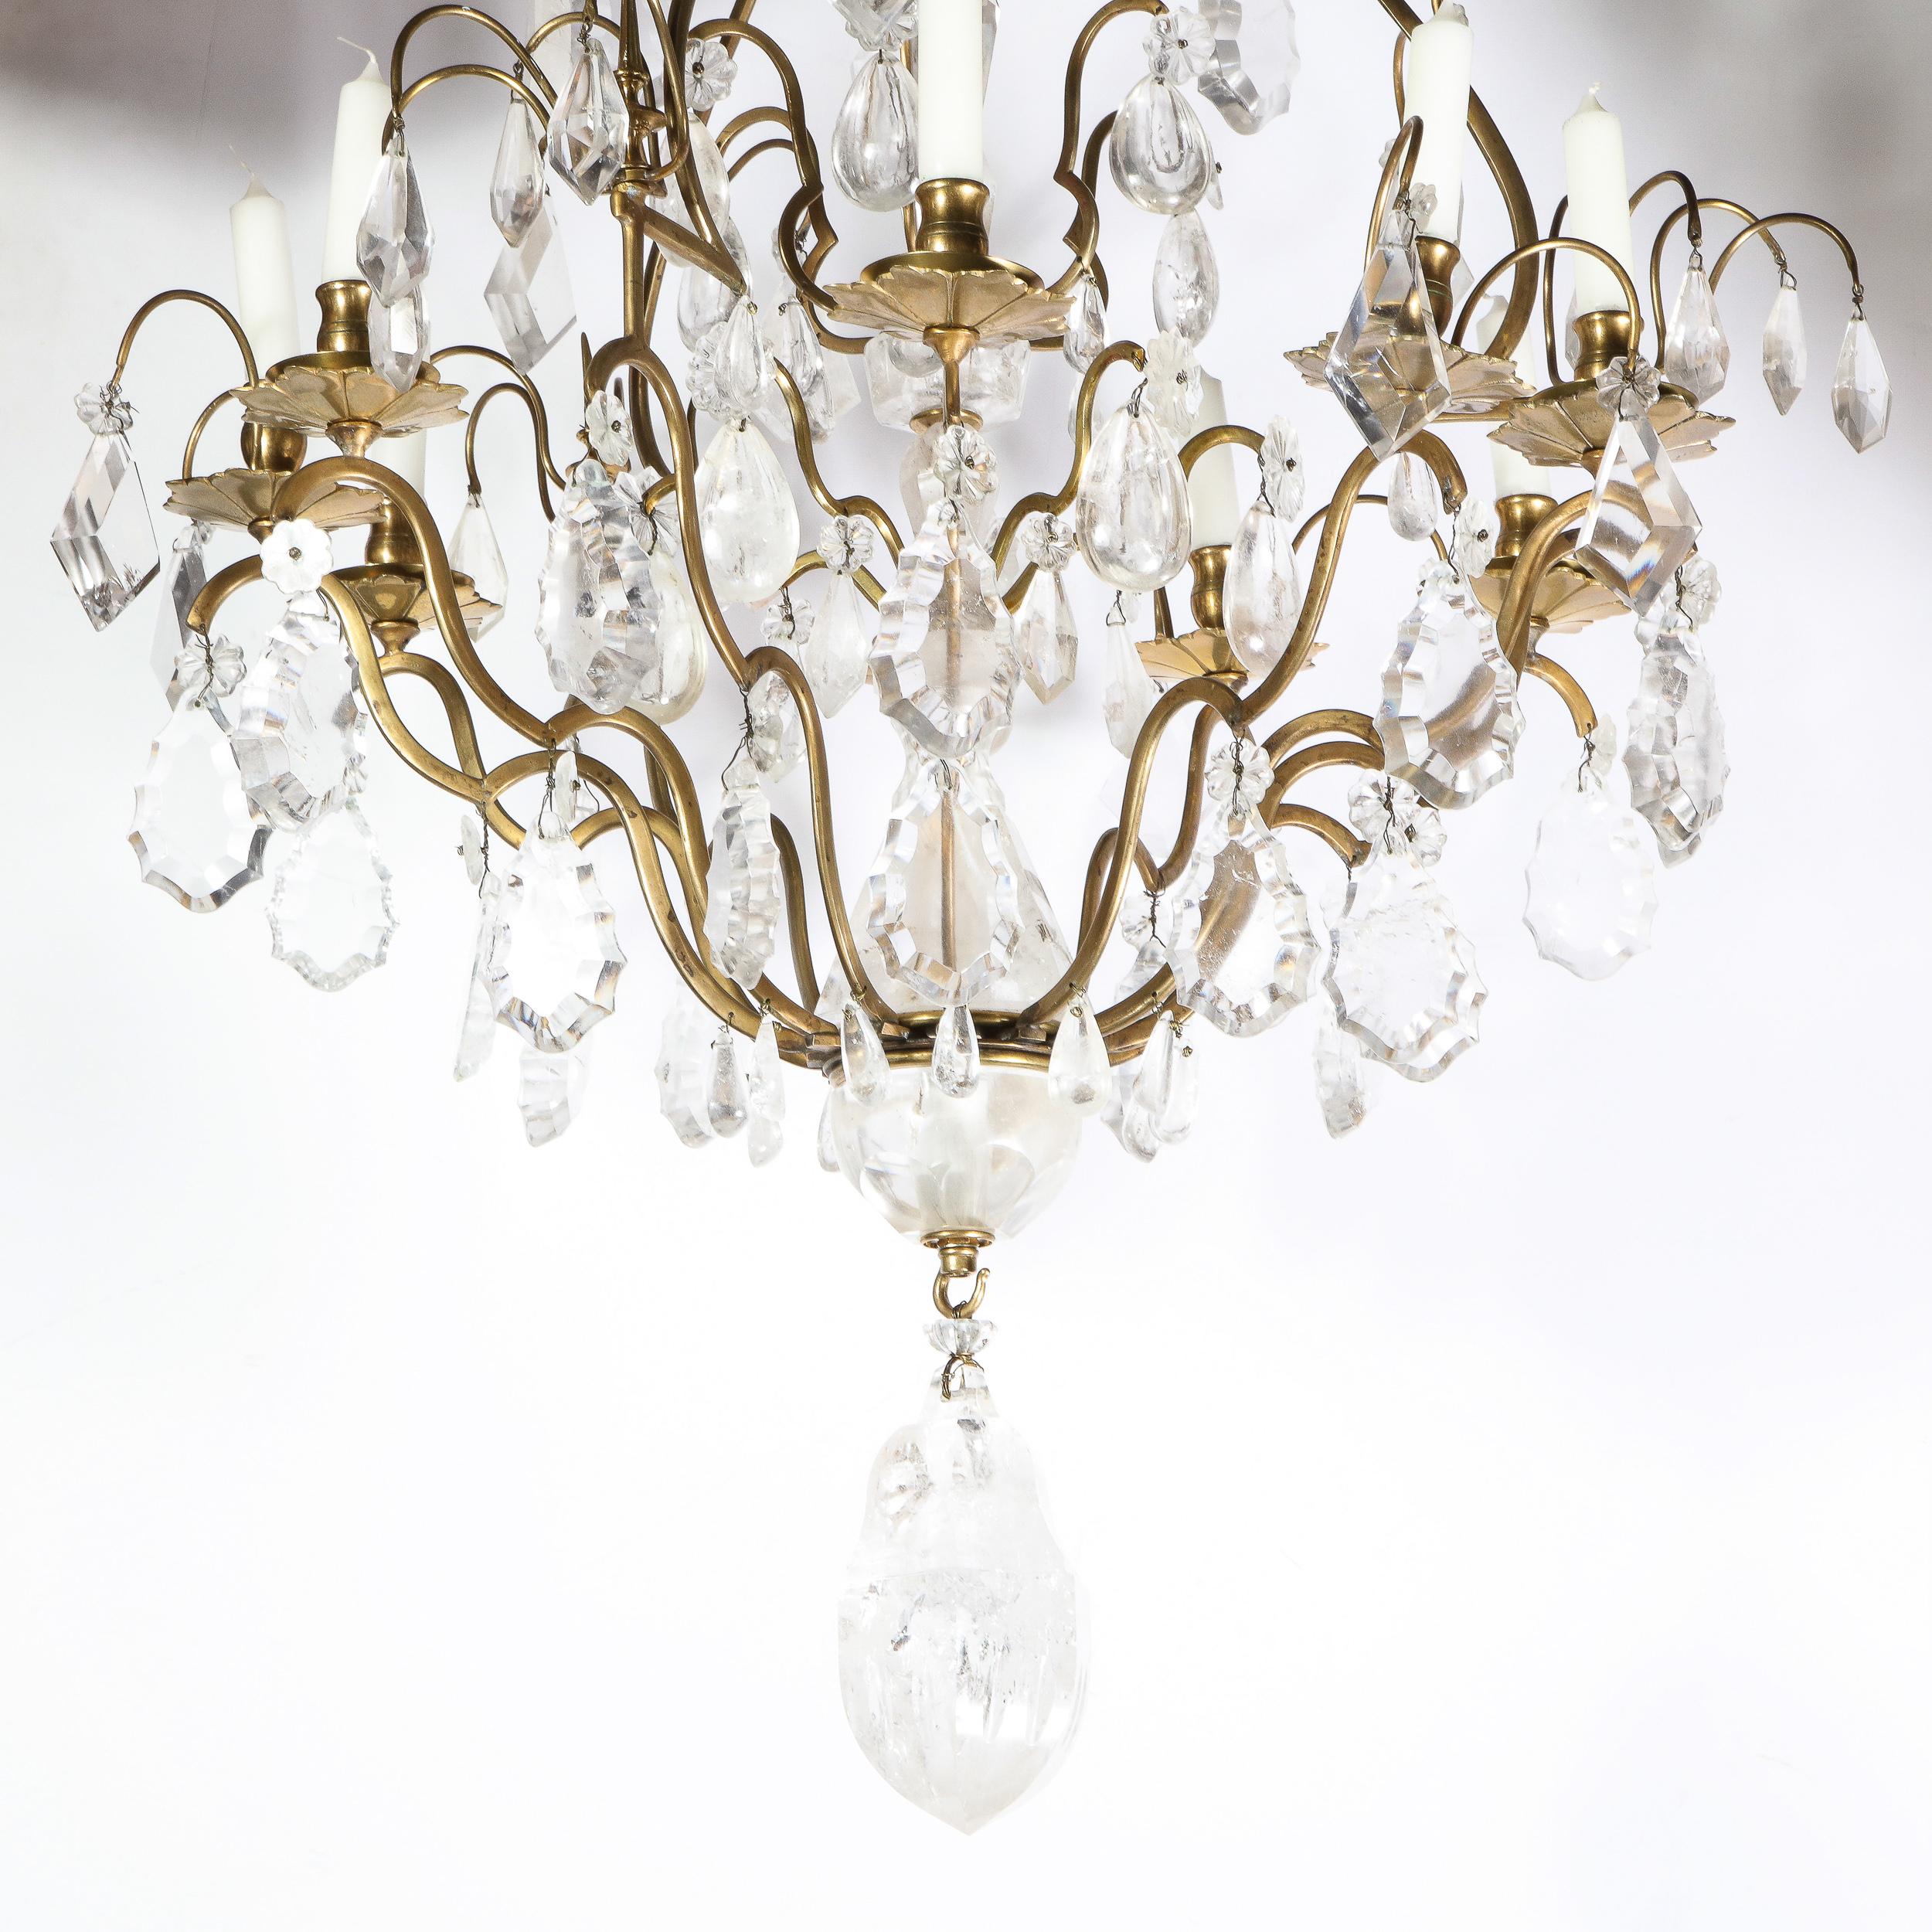 This elegant rock crystal and gilded bronze nine-arm chandelier was realized in France, during the early 19th century. It features a central baluster body carved in rock crystal from which nine sinuously curved gilded bronze arms extend culminating